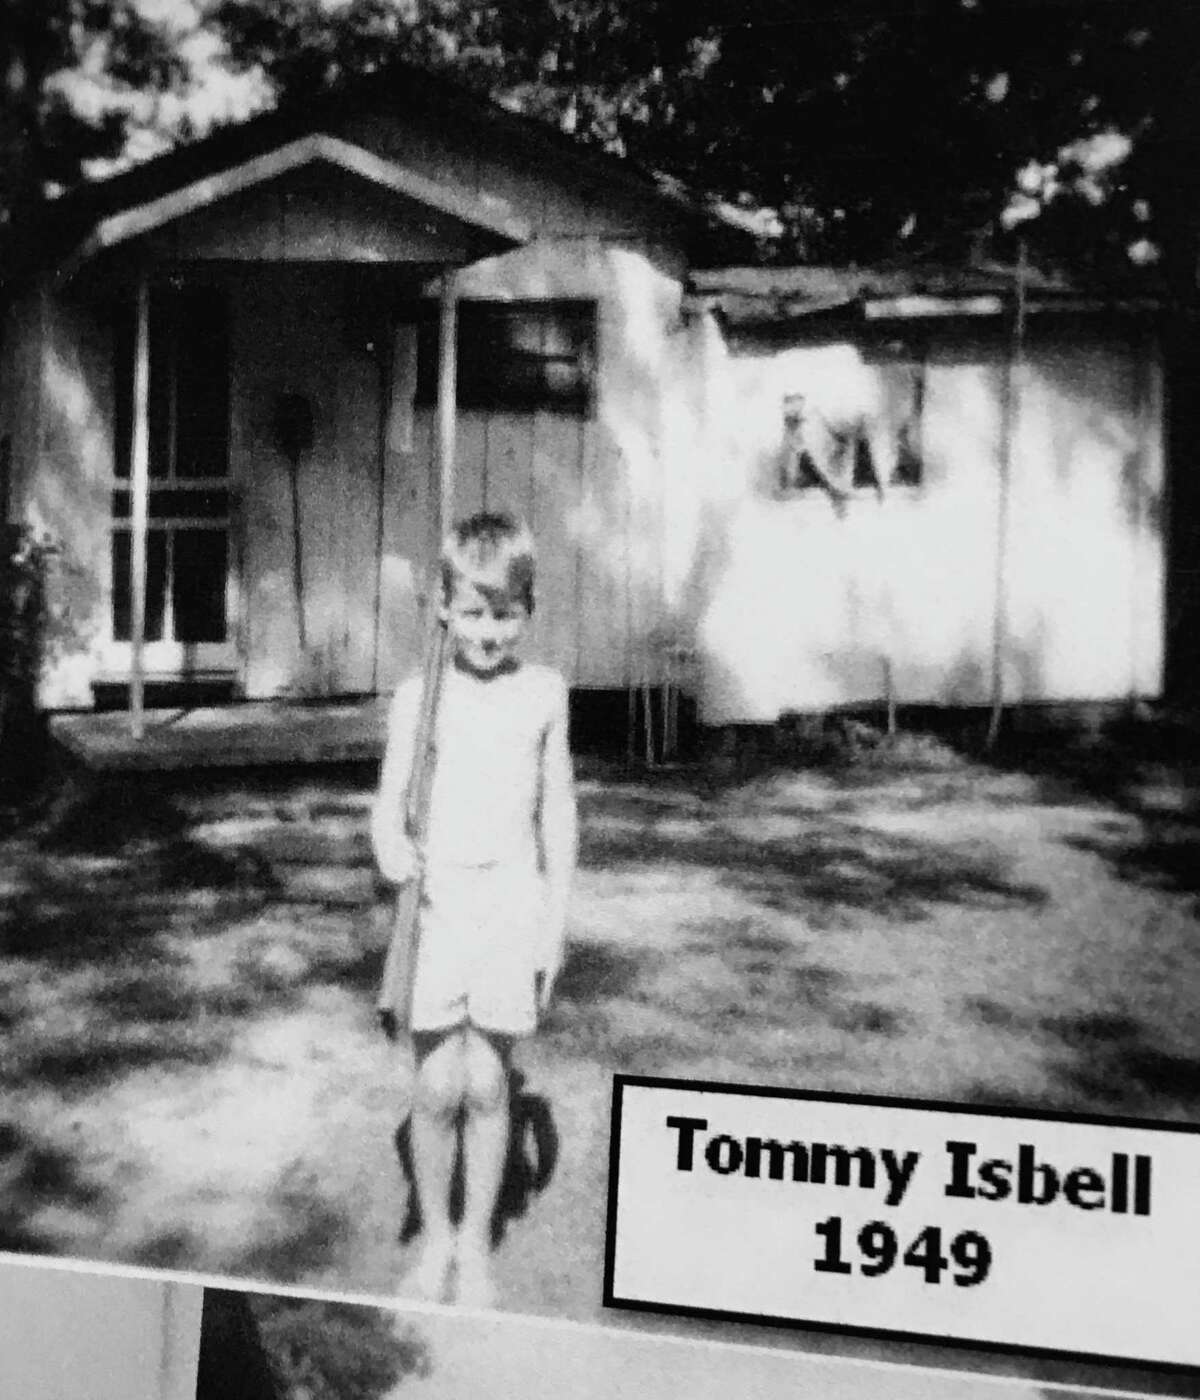 A photo of young Tommy Isbell at the Midland Gasoline Camp southeast of Conroe.